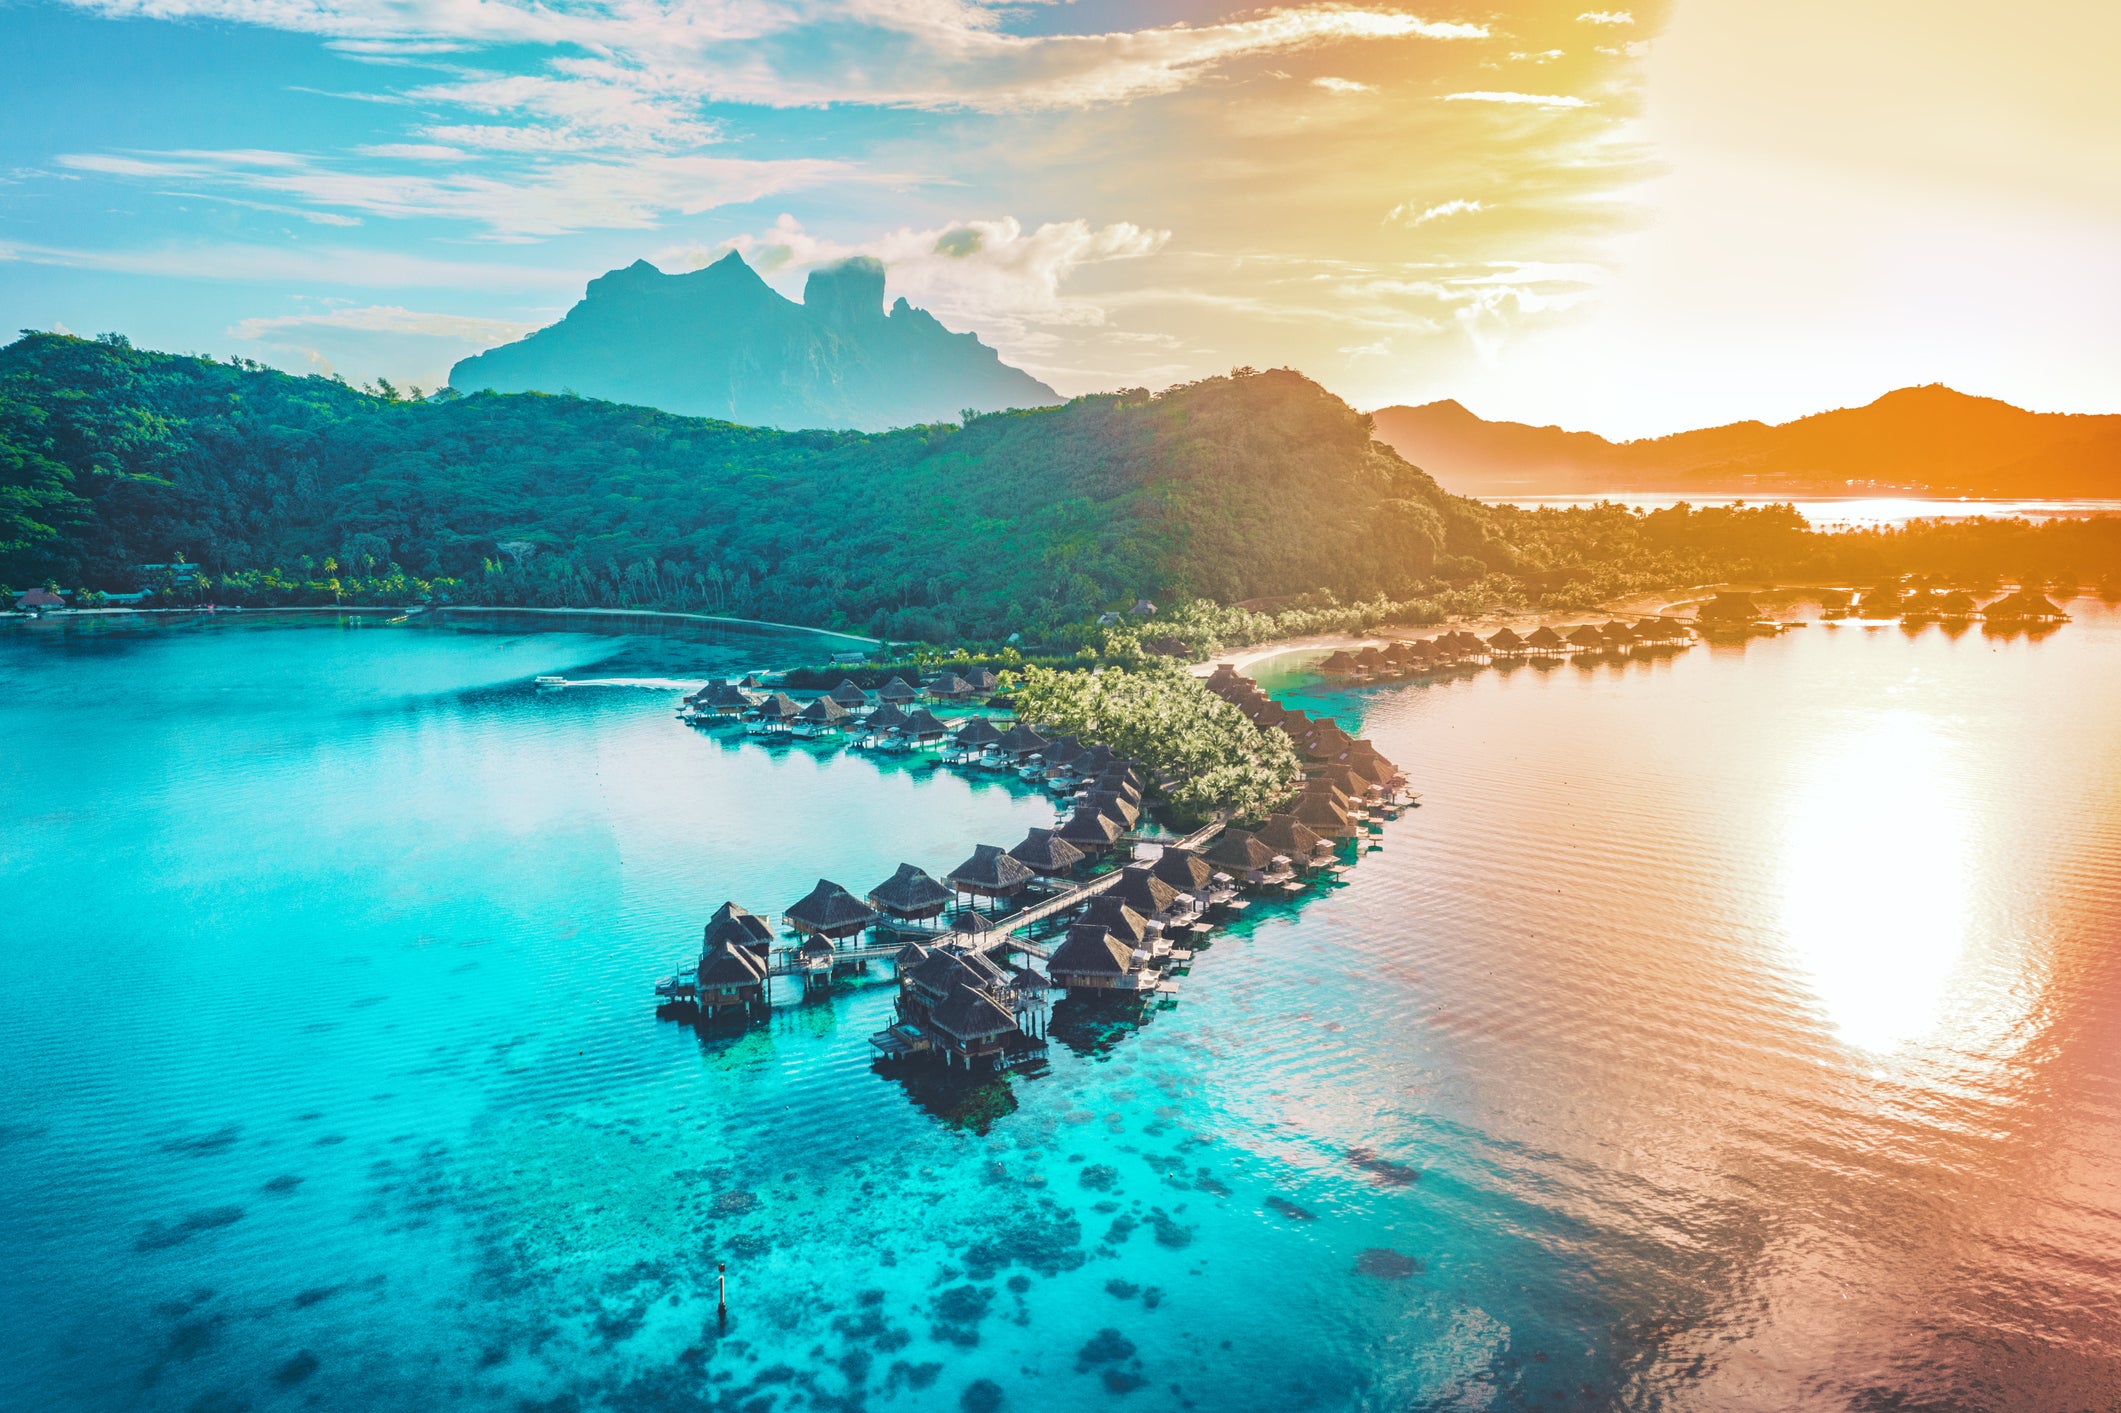 Villages of overwater bungalows dot the South Pacific in Bora Bora